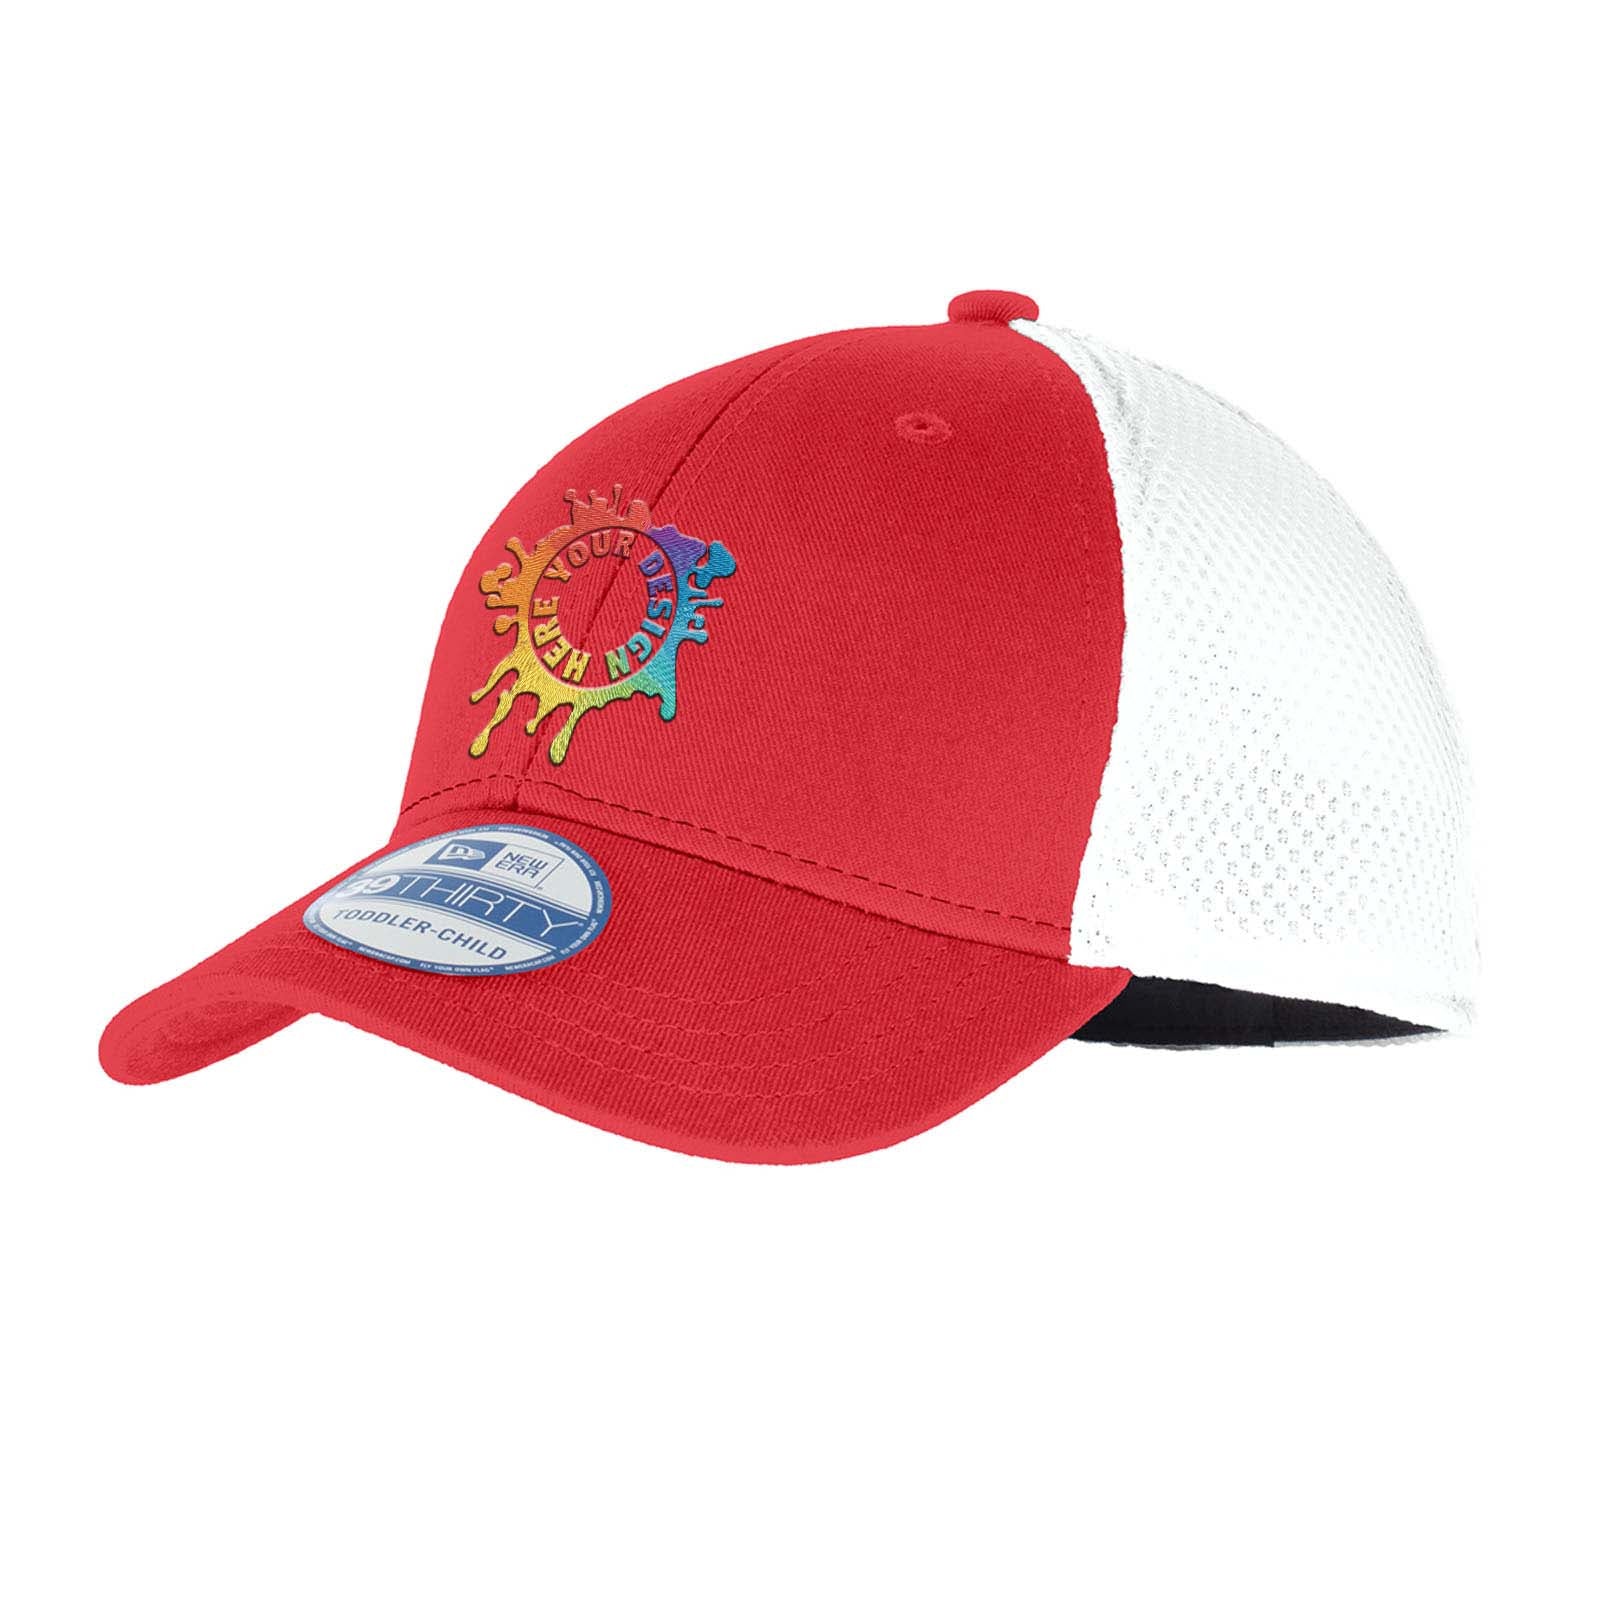 Embroidered New Era® Youth Stretch Mesh Cap - Mato & Hash